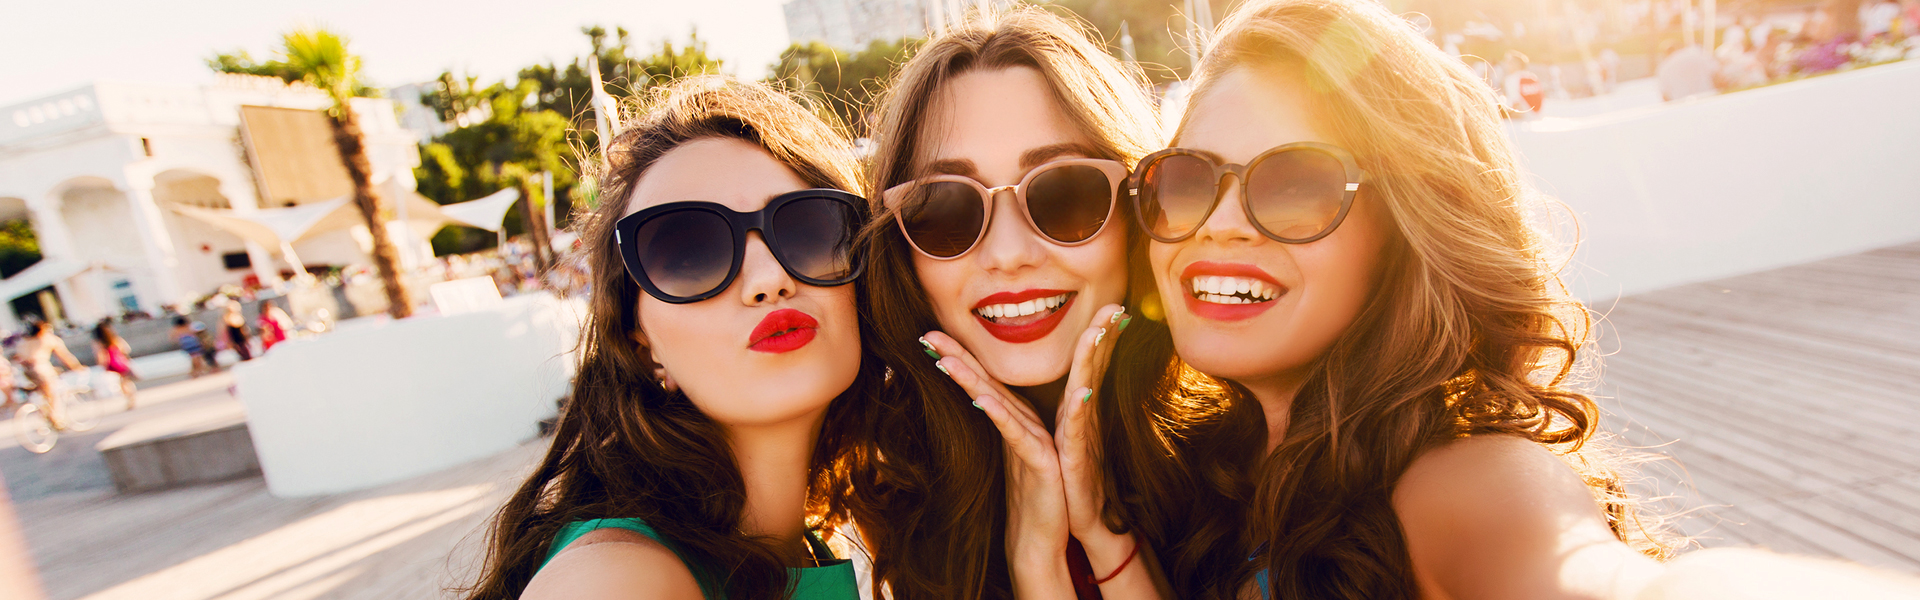 Friendship Day Facts: Signs That Your Mental Health Is Improving